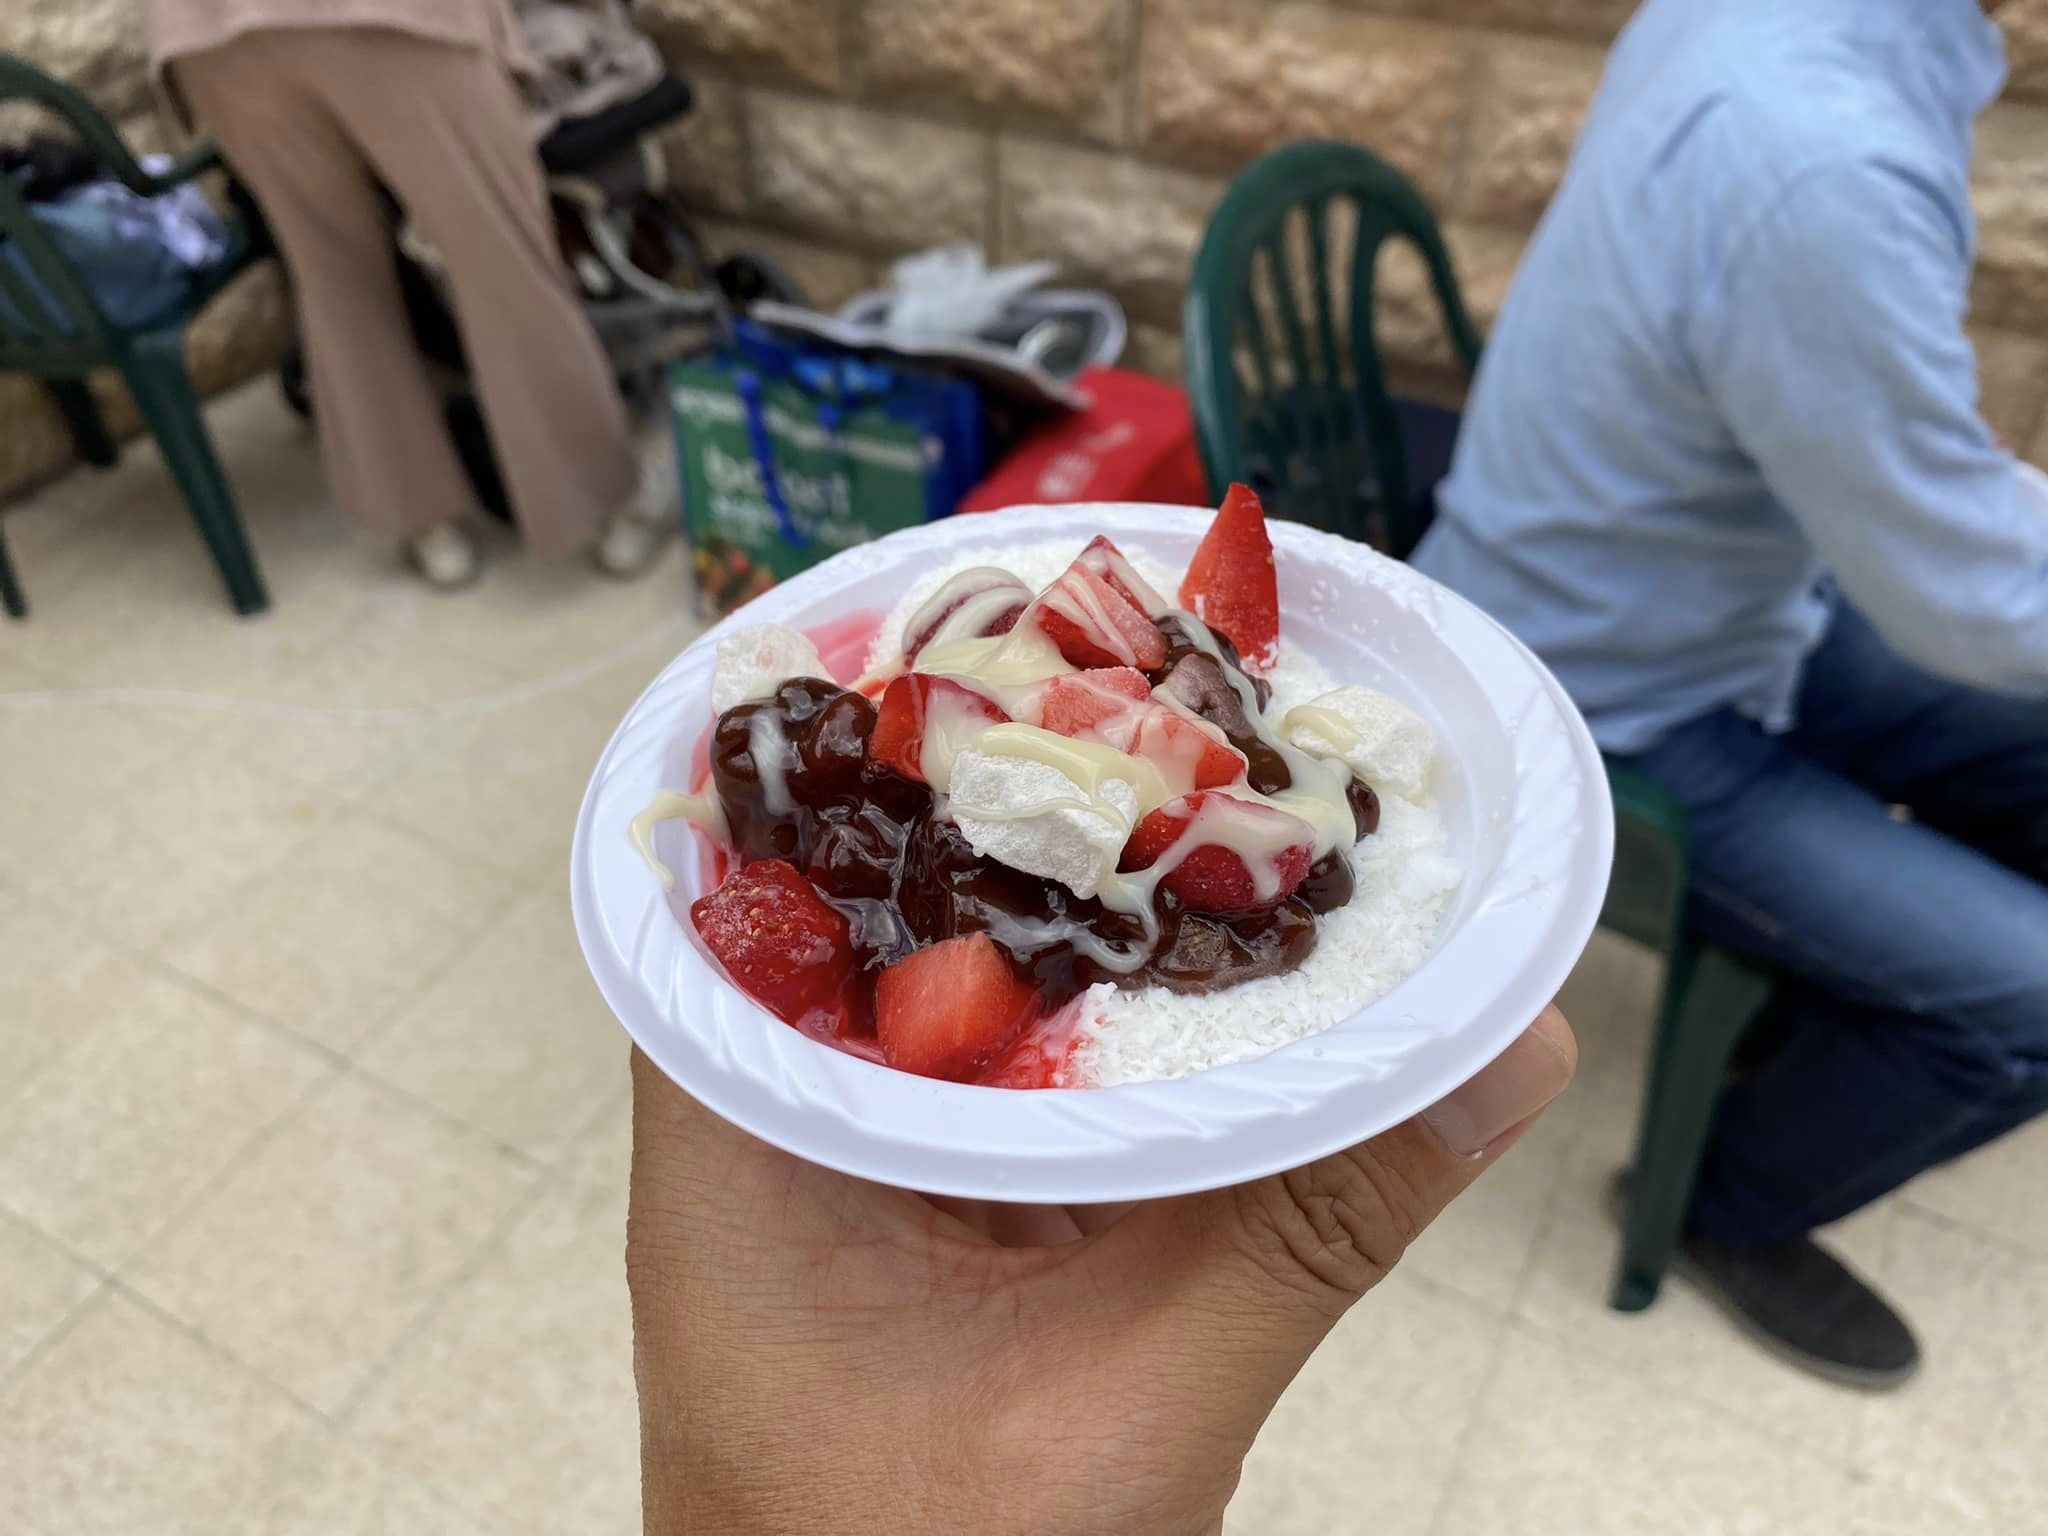 Snowflake Shaved Ice was the locals’ favorite, 200 bowls were served in one day.